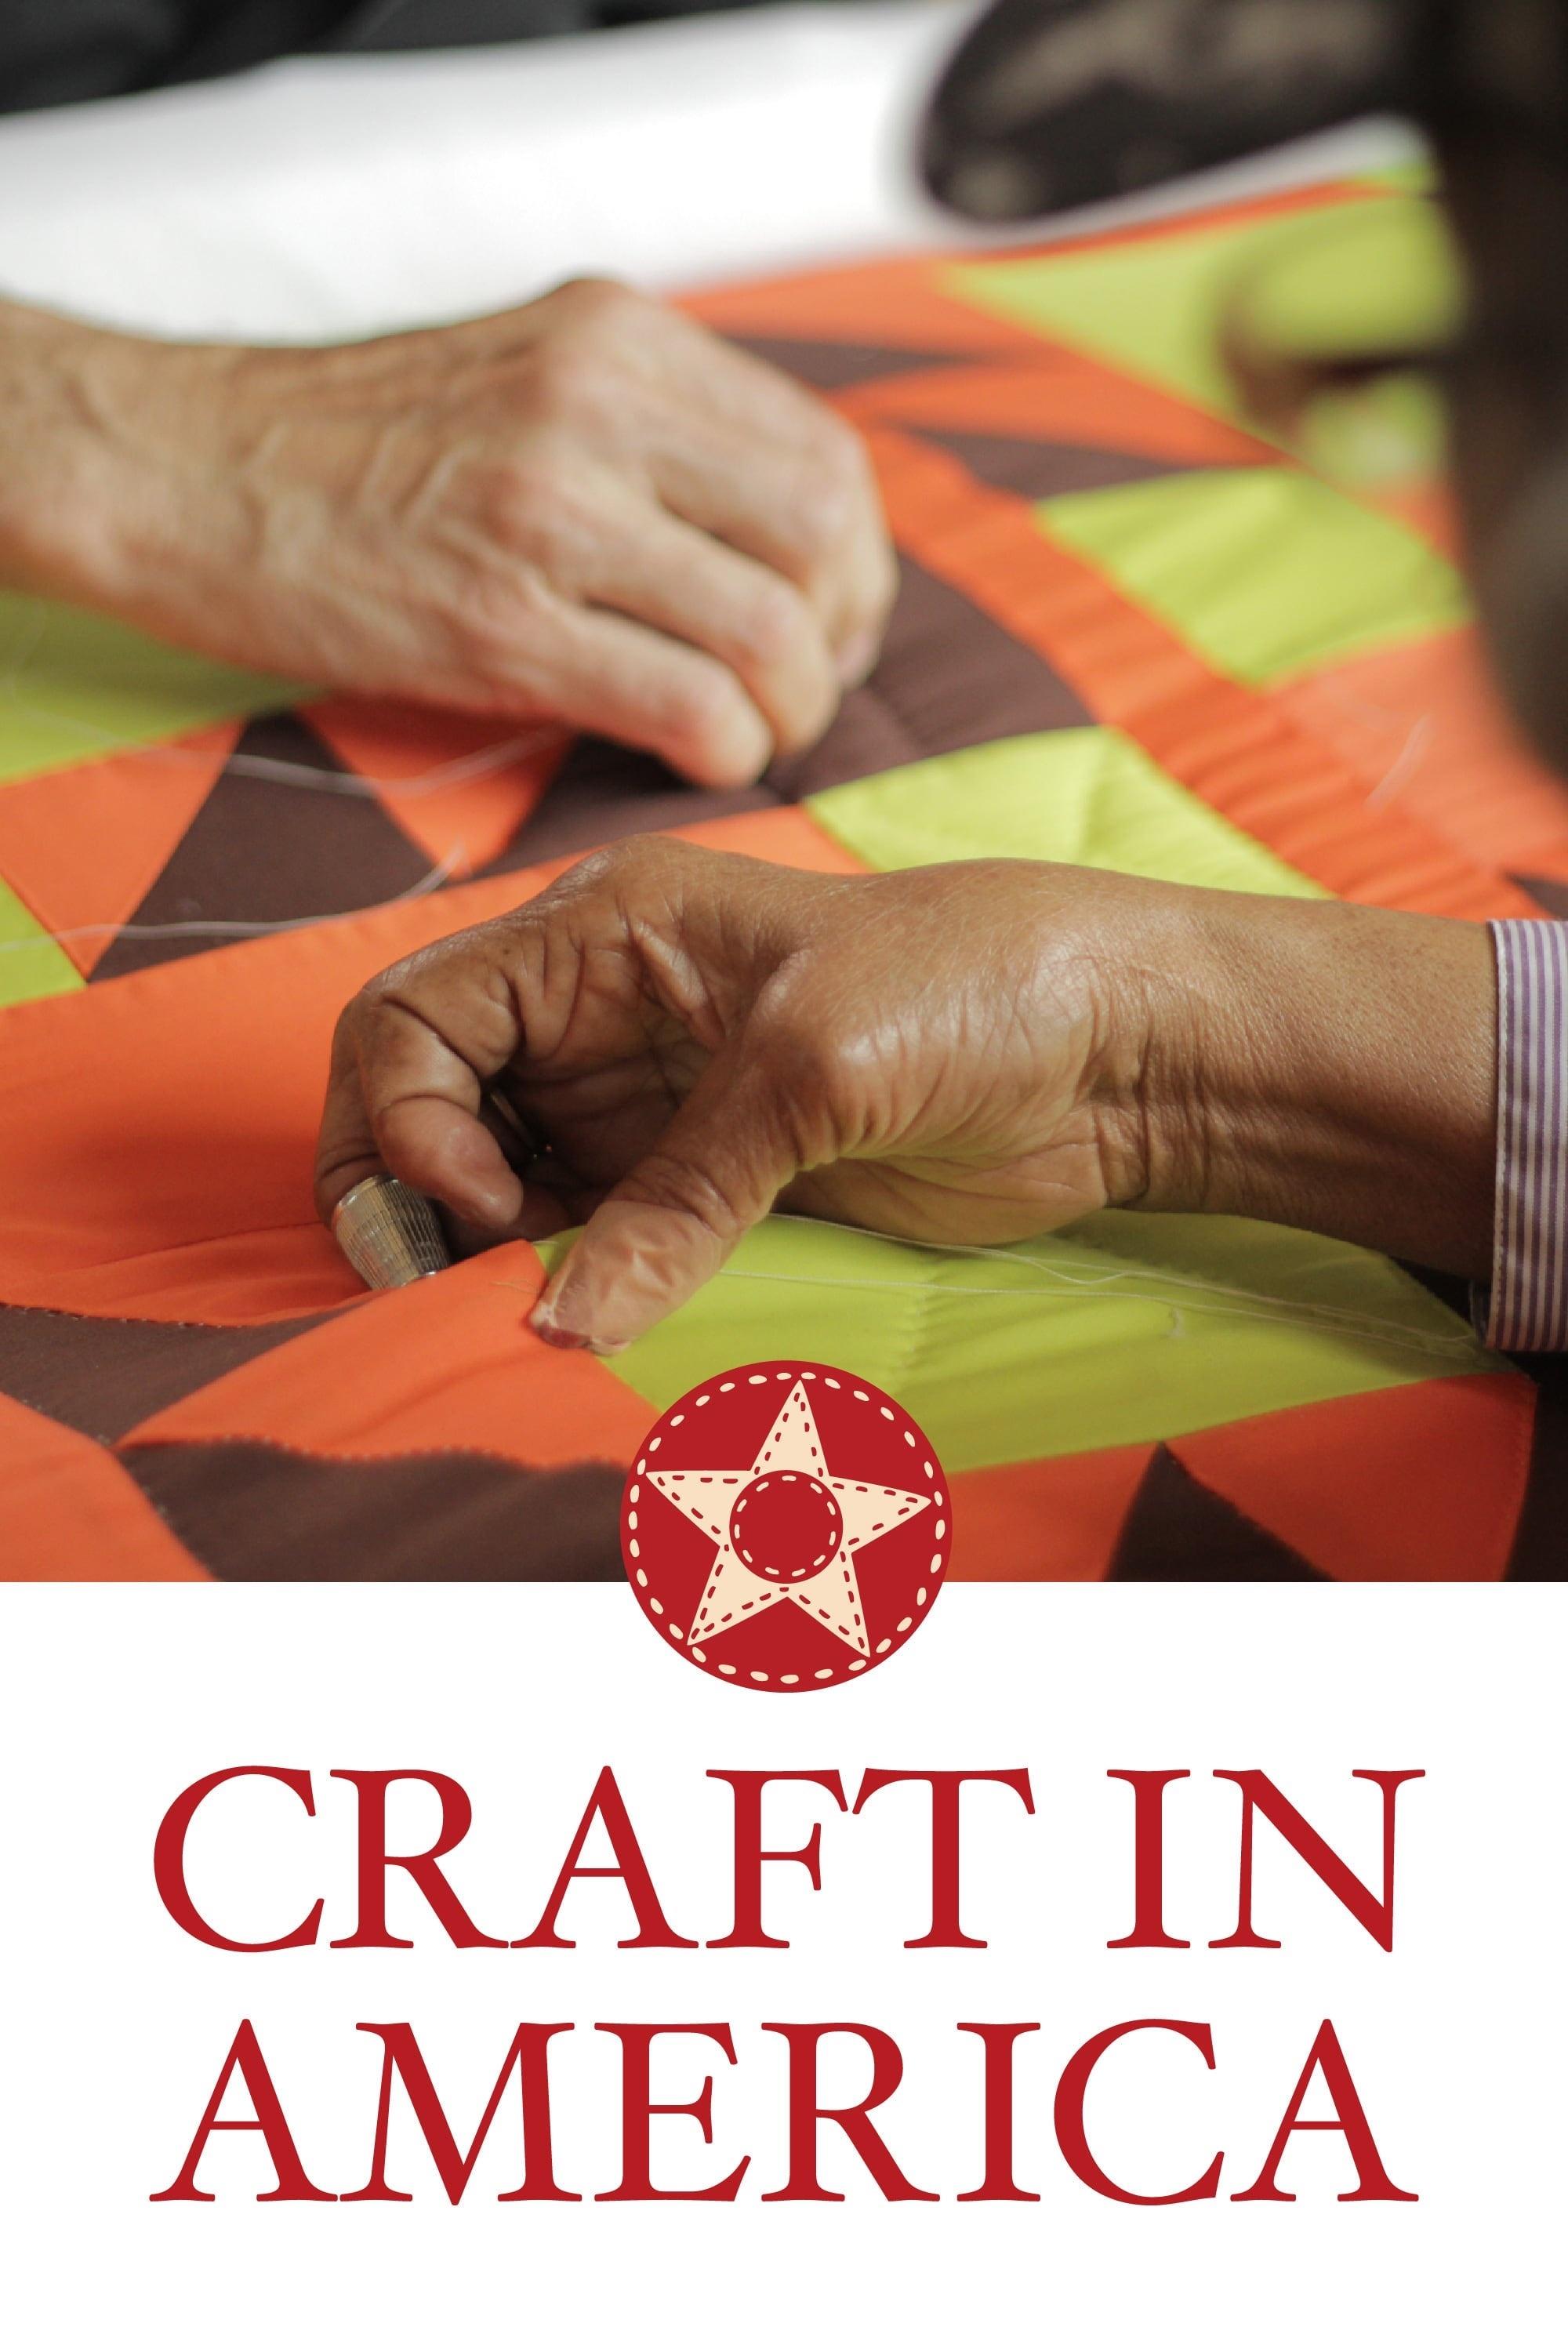 Craft in America - Guide - purpose-and-planning